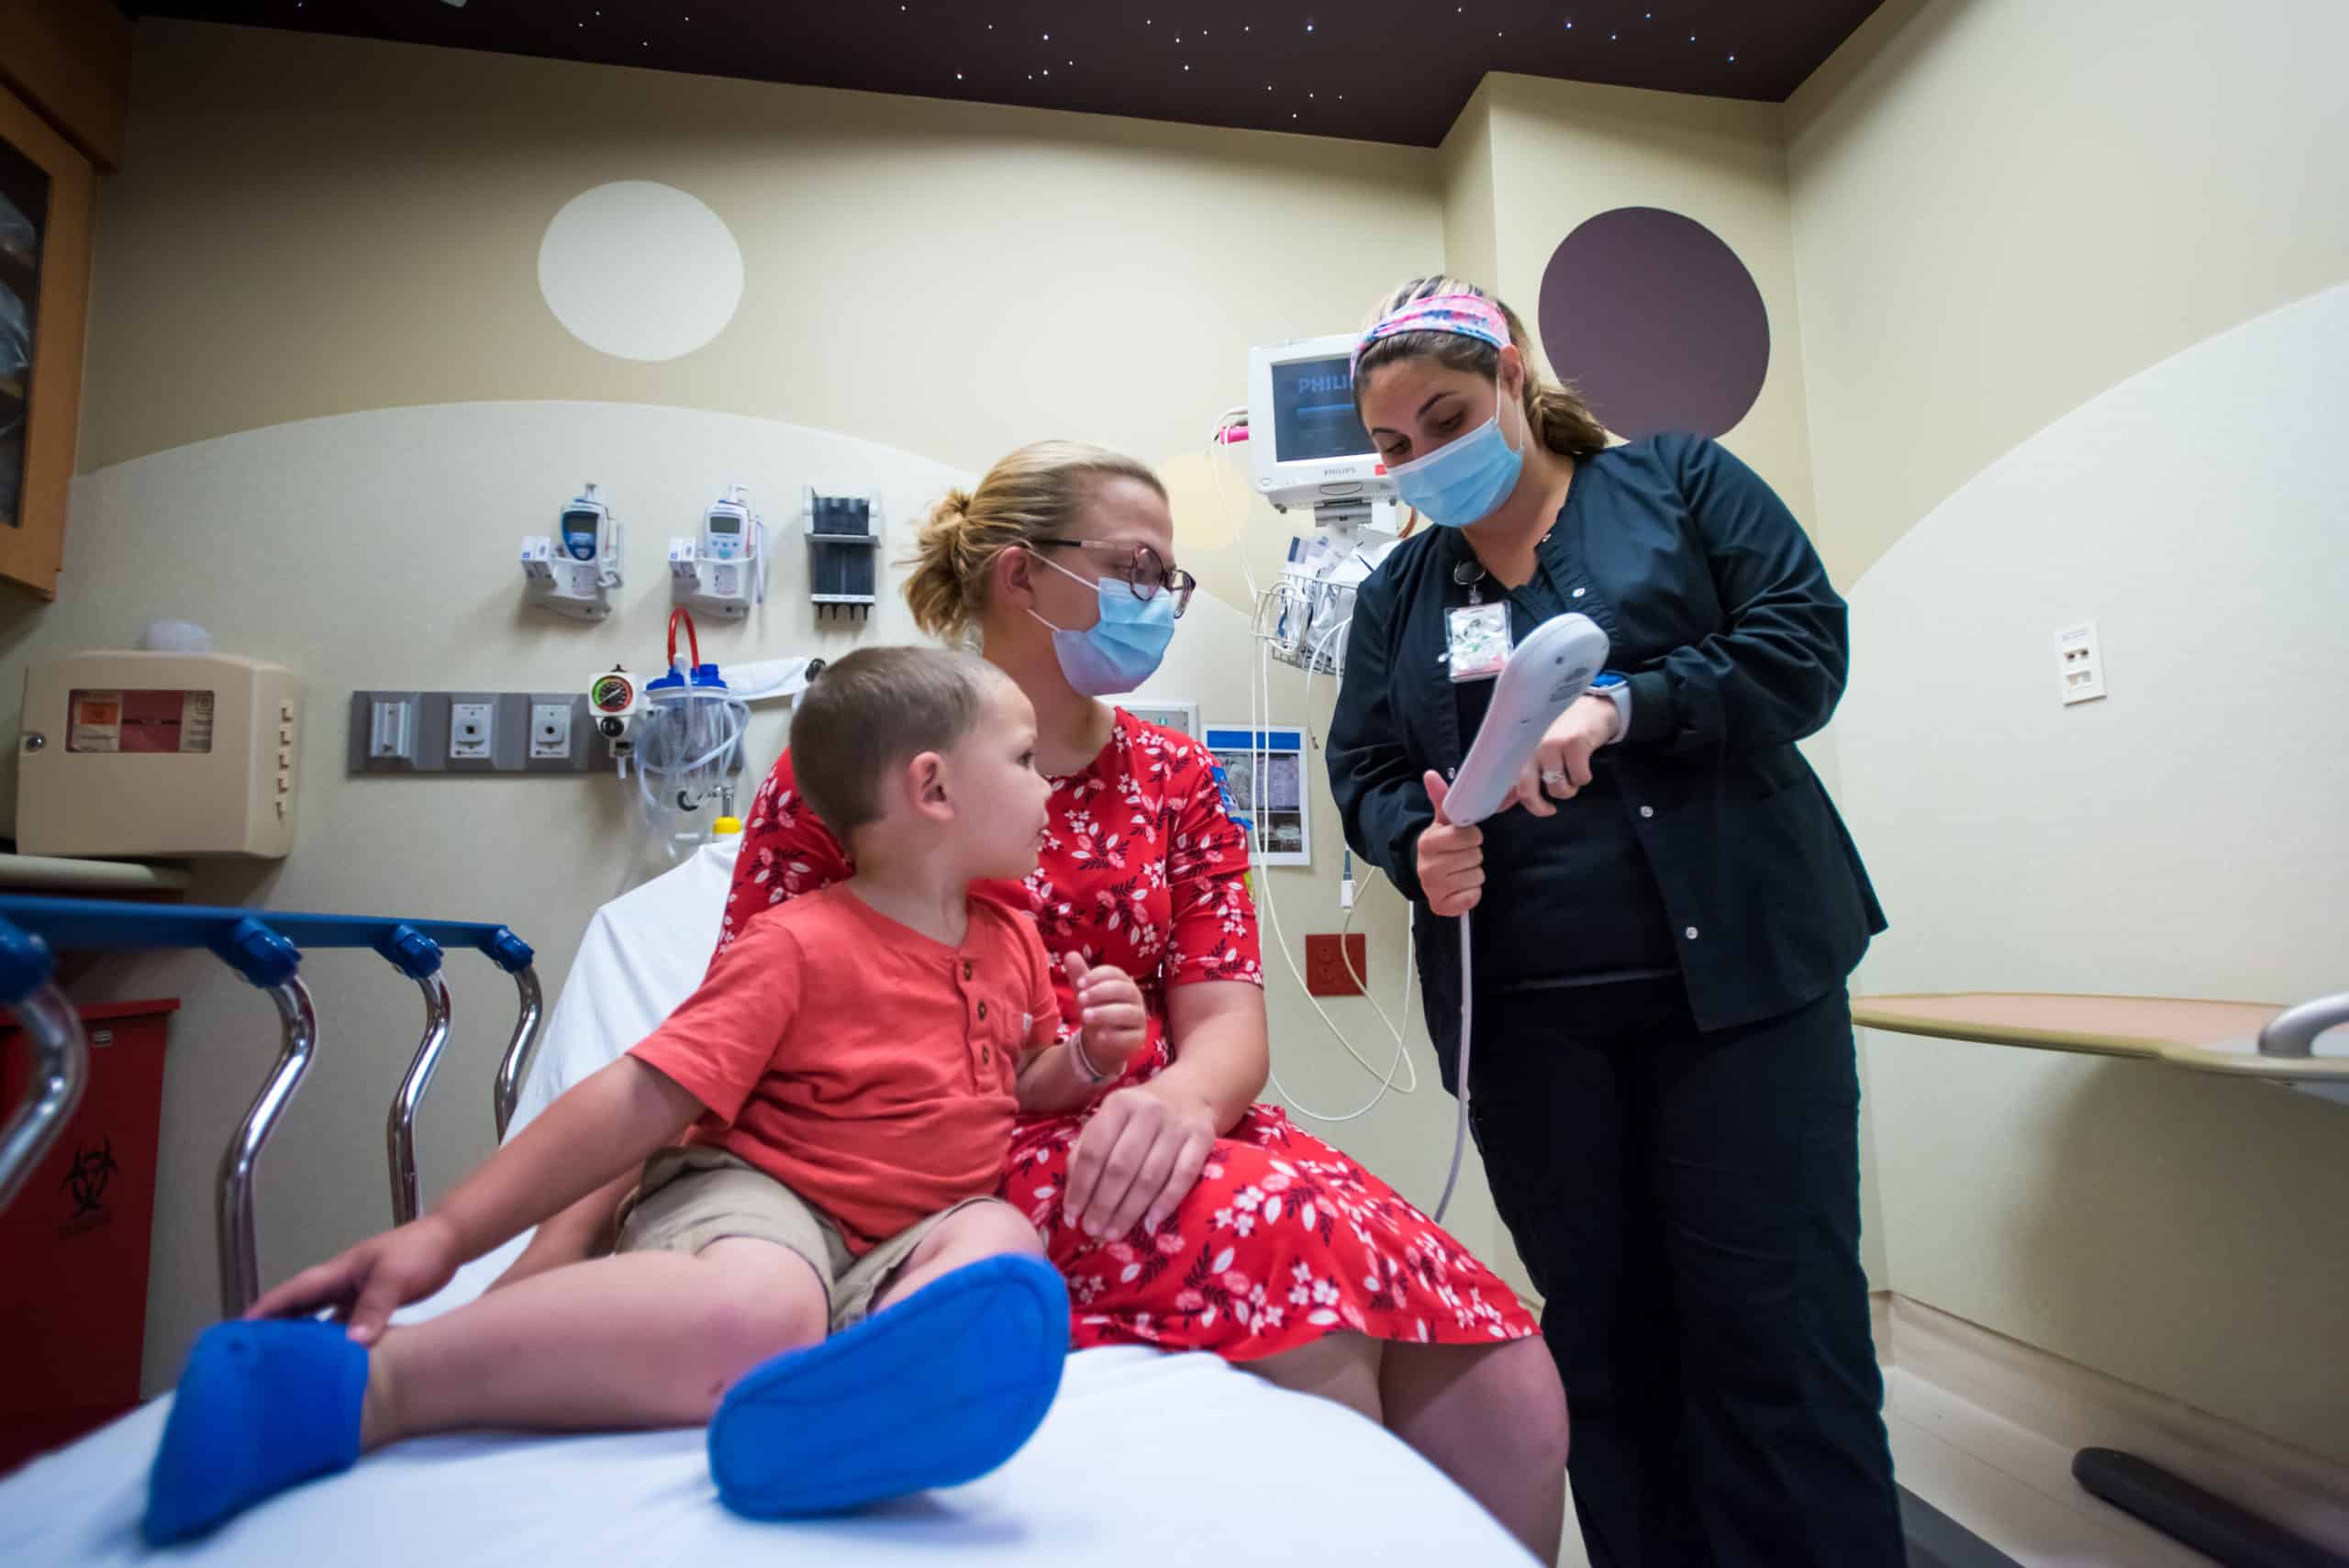 A nurse helps a mother and a pediatric patient settle into their room.